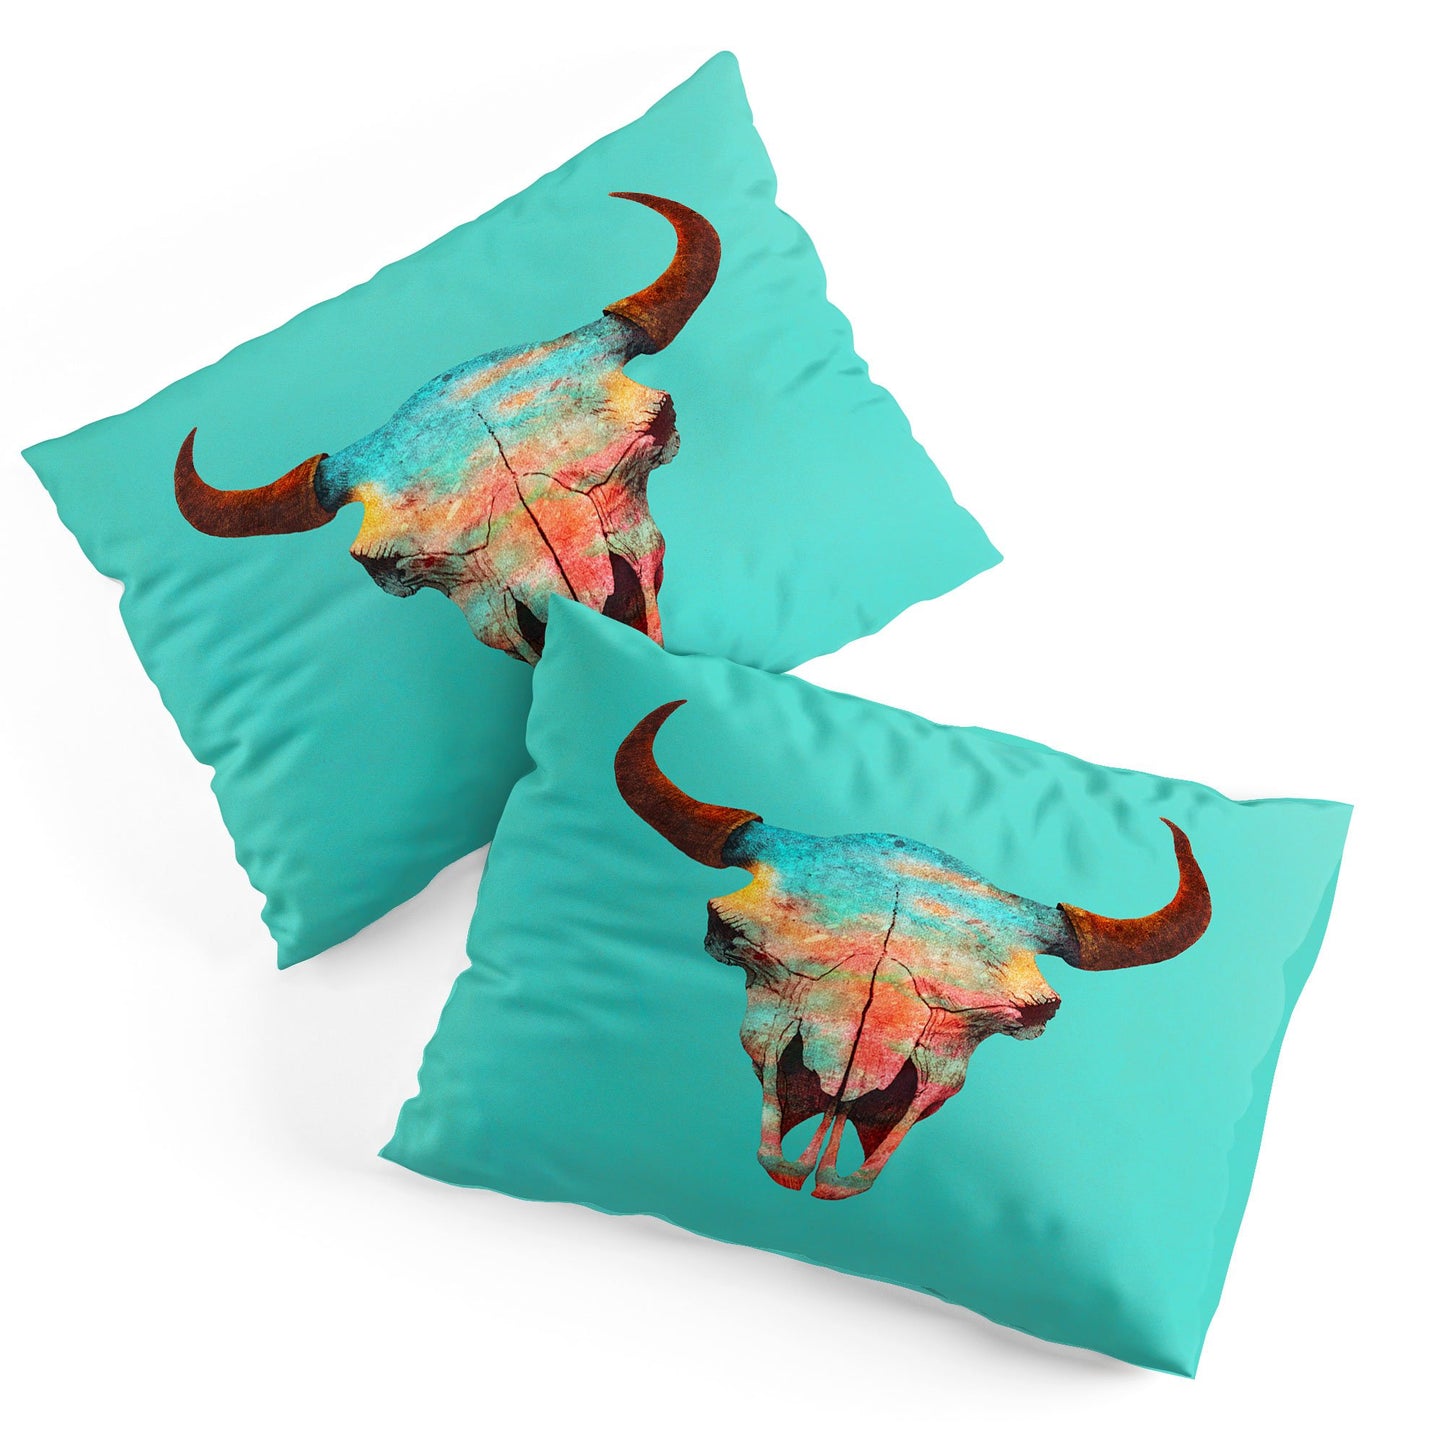 Turquoise Bull Bed In A Bag